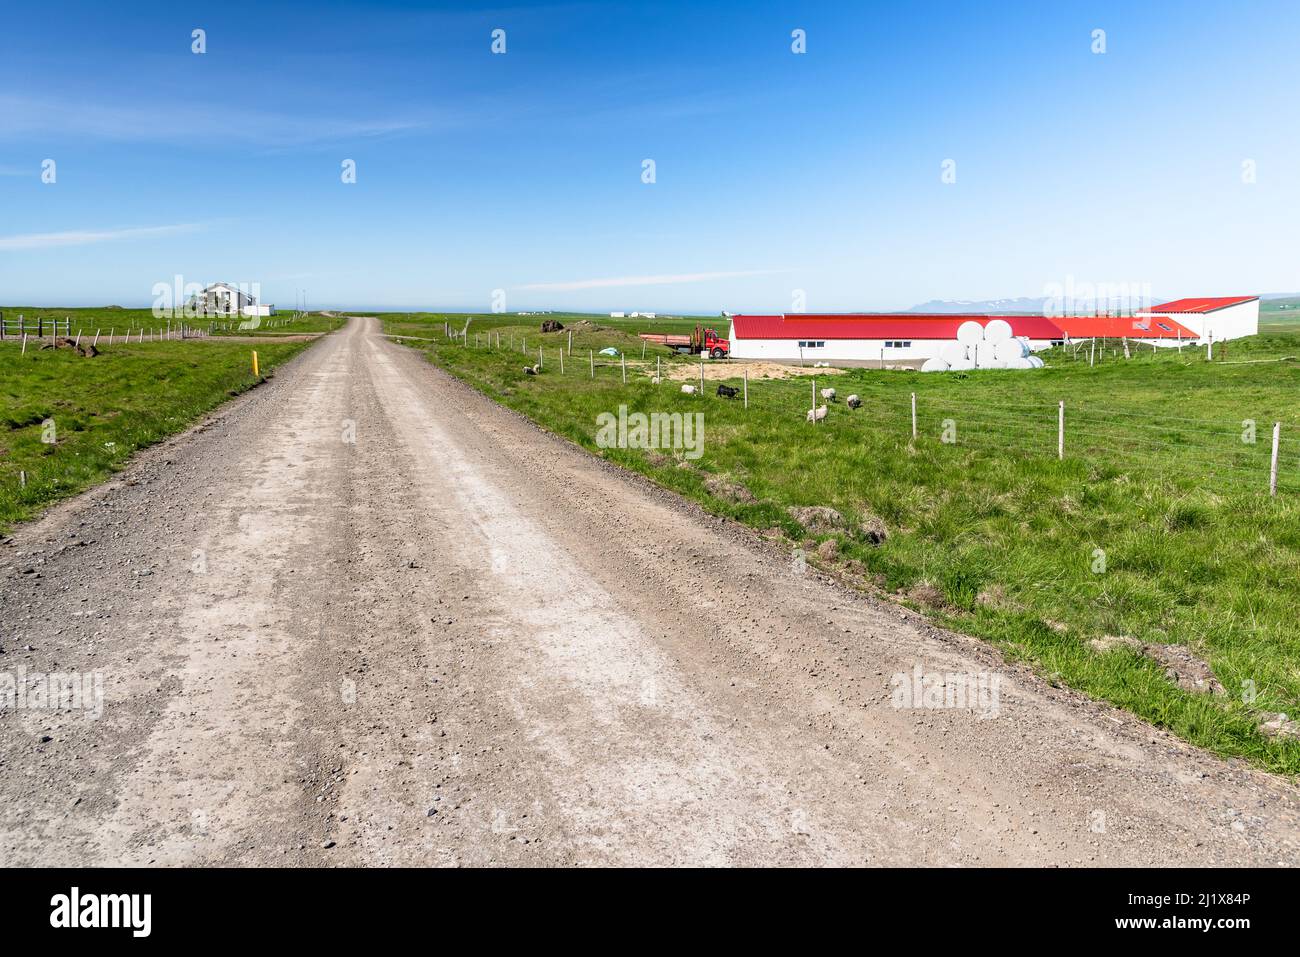 Farm buildings along a straight gravel road in the countryside on a clear summer day Stock Photo